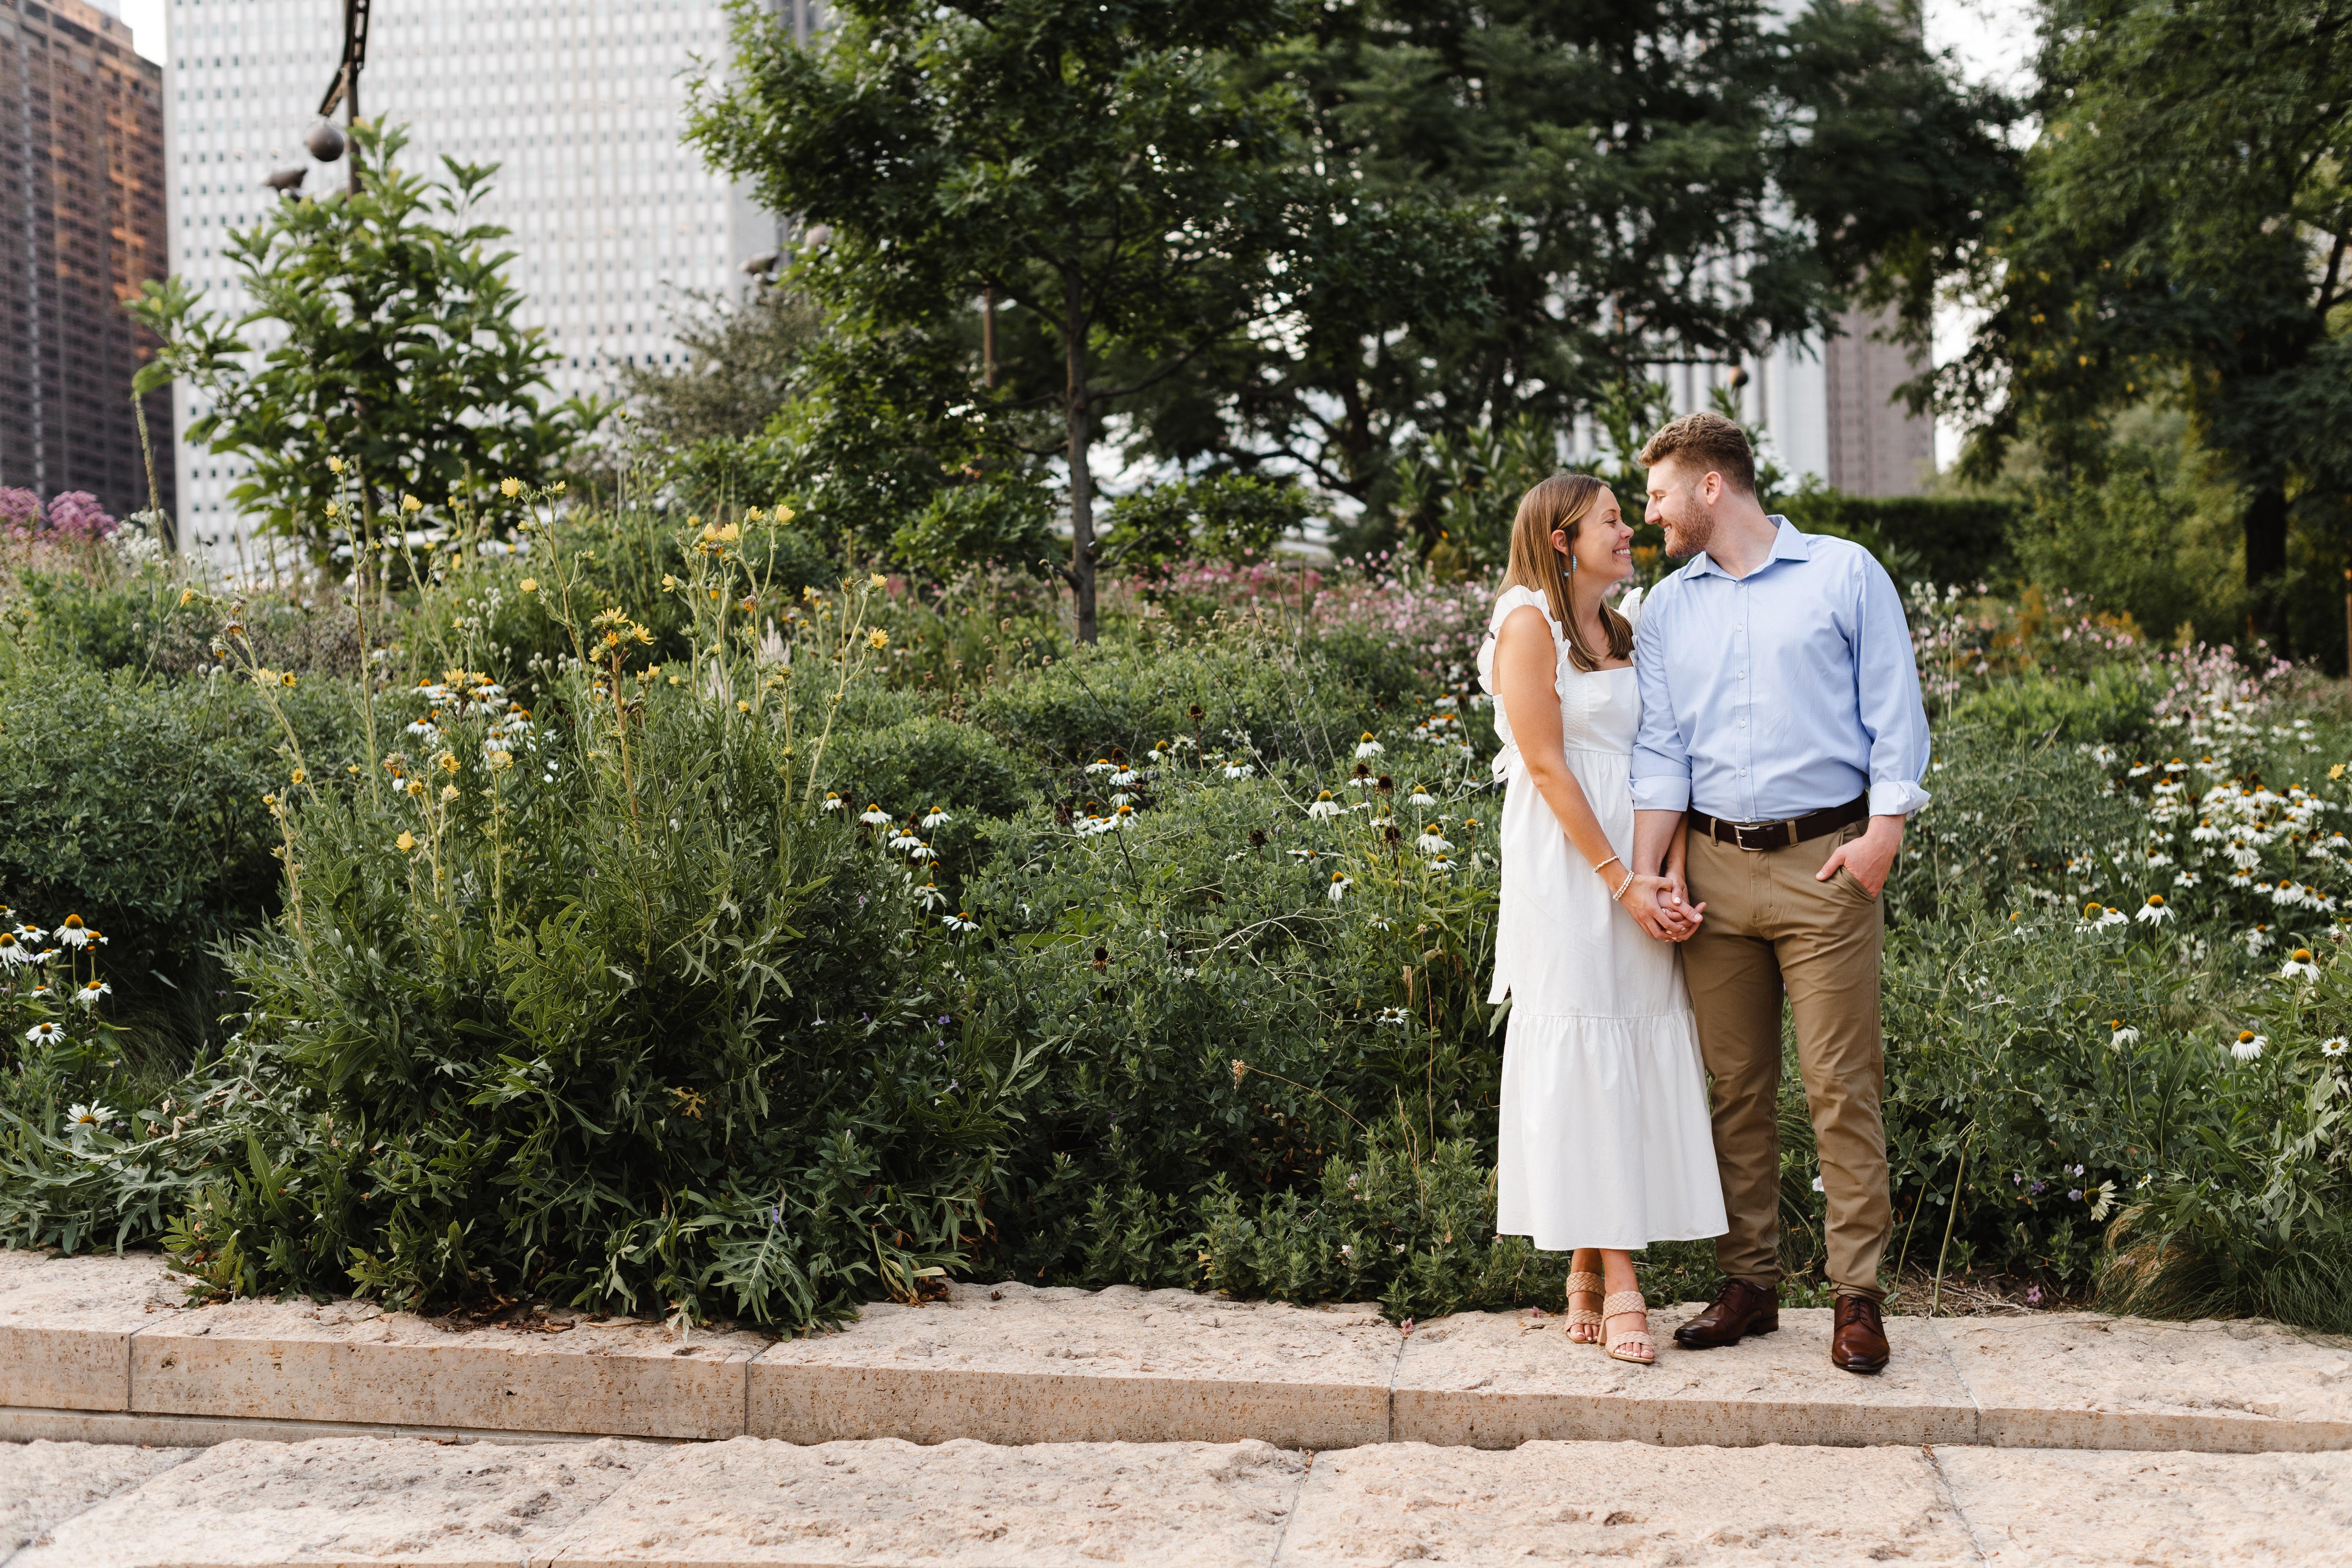 The Wedding Website of Carly Bettinardi and Brodie Meyer